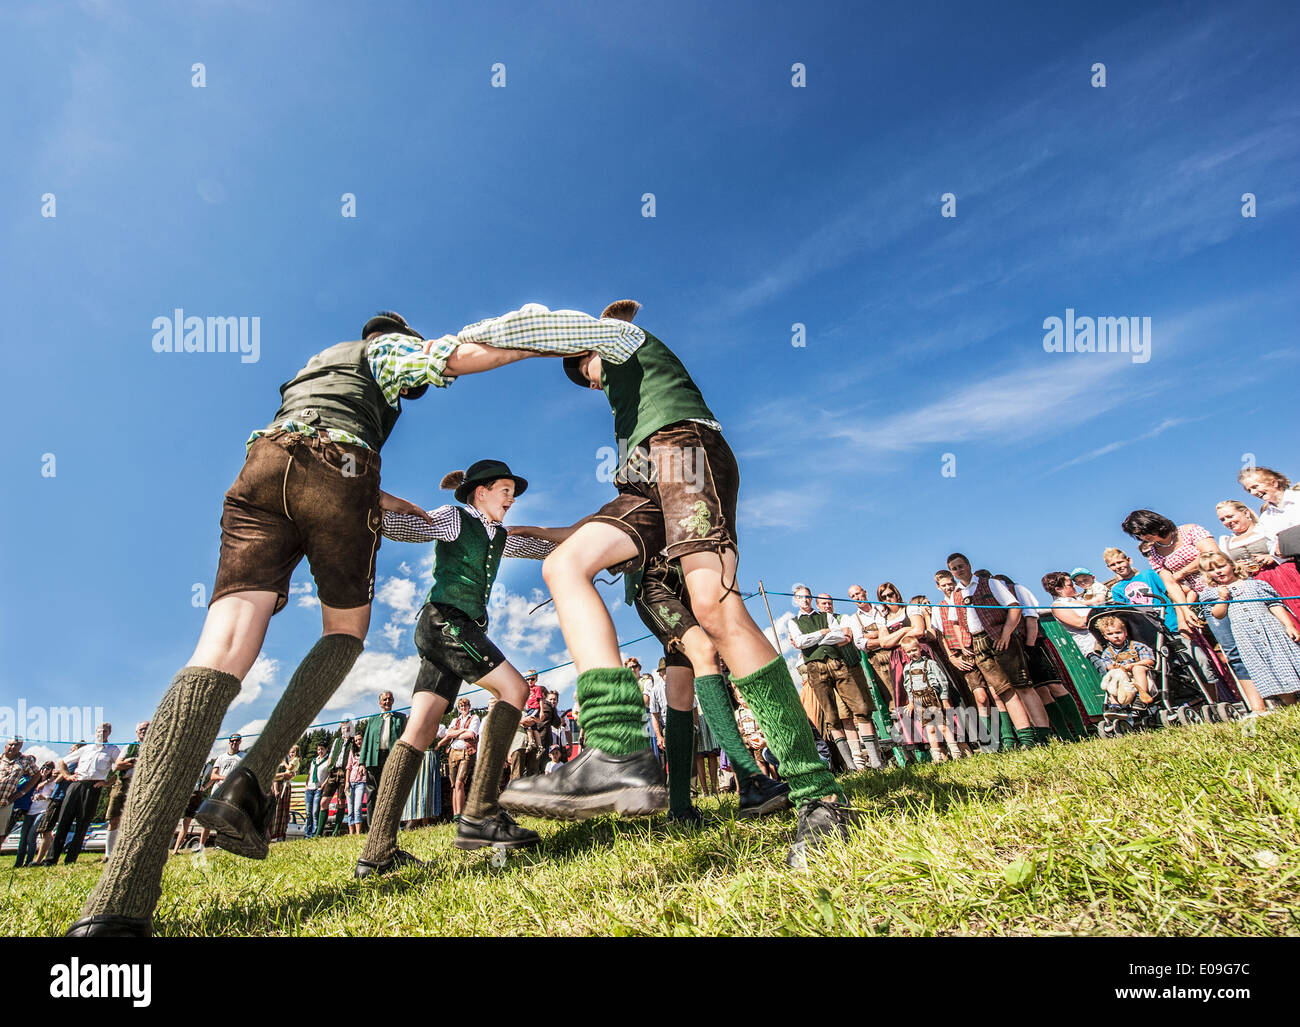 Austria, Irdning, Boys in traditional clothing dancing the Schuhplattler at May festival Stock Photo